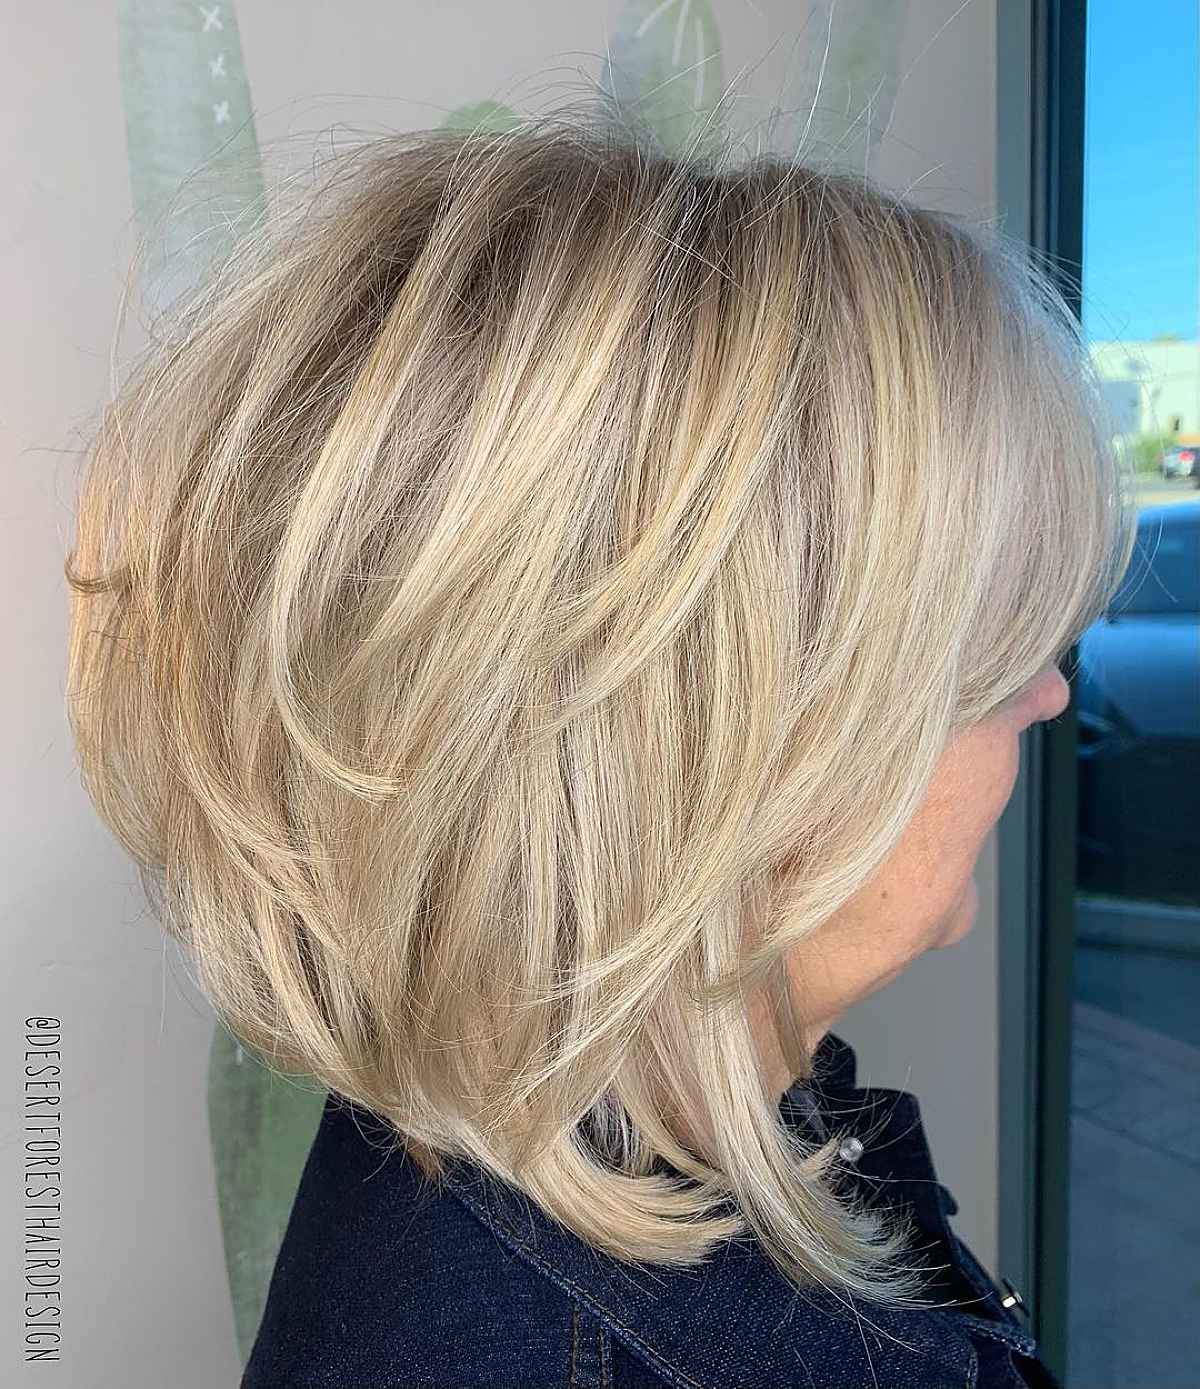 Medium Layered Bob for ladies in their 60s